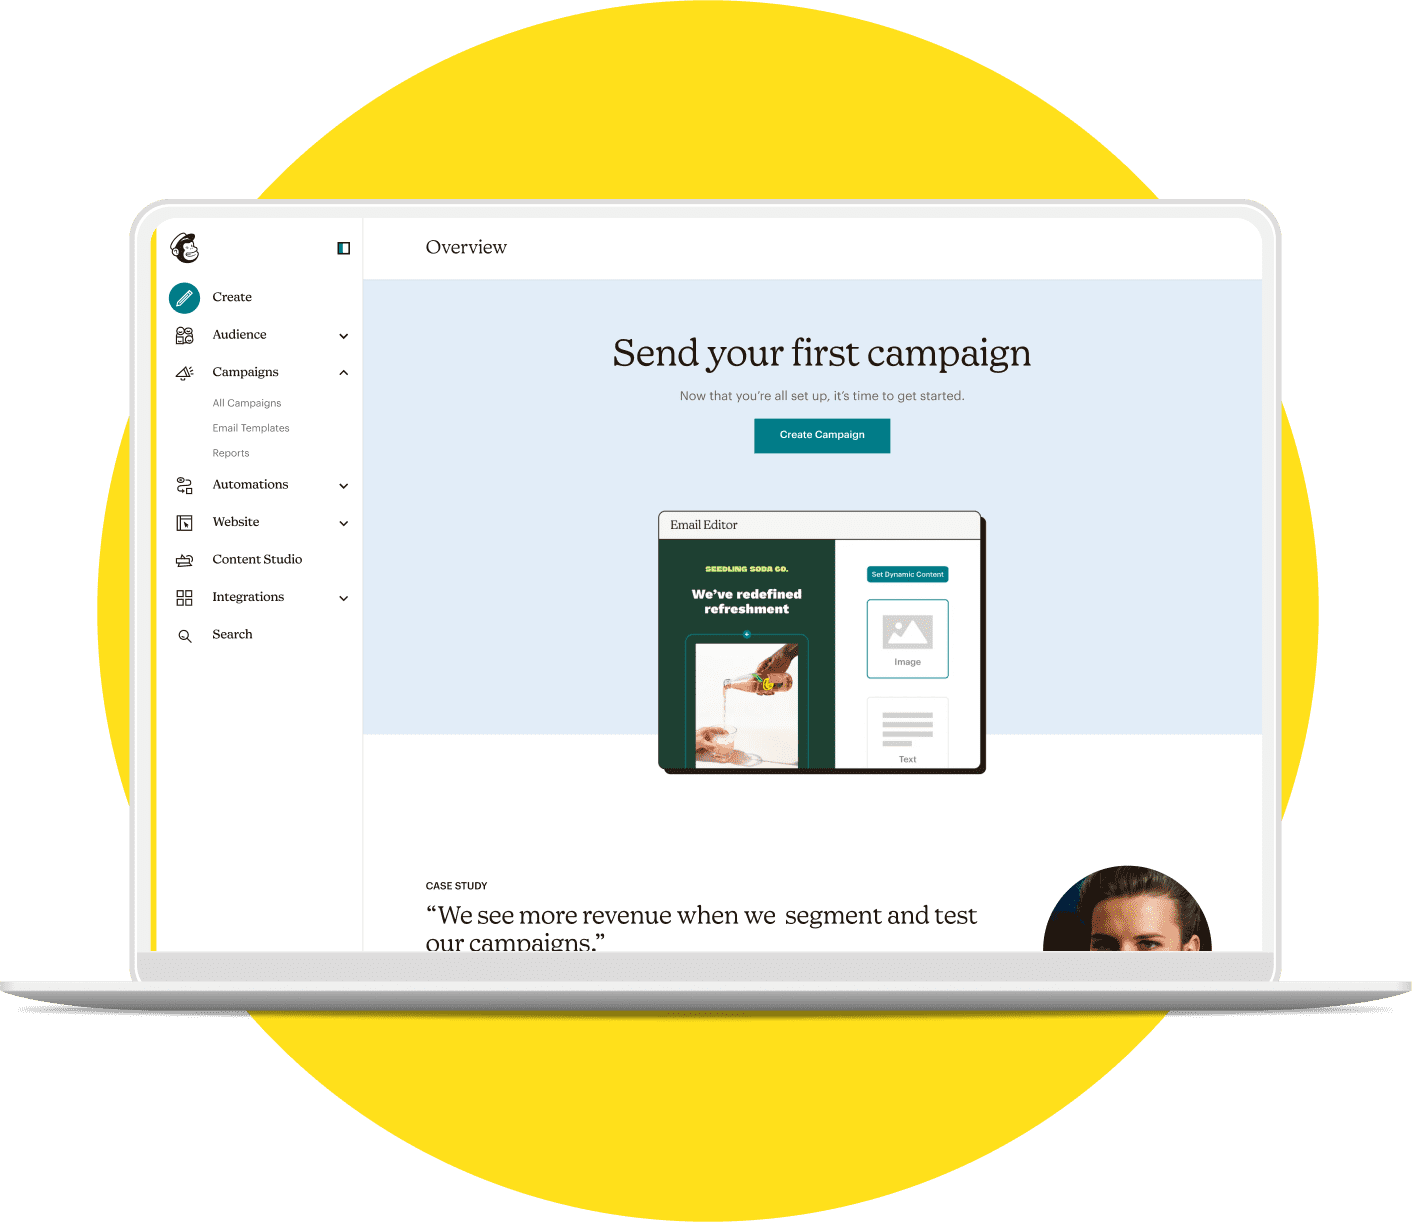 Accelerate your growth with Mailchimp